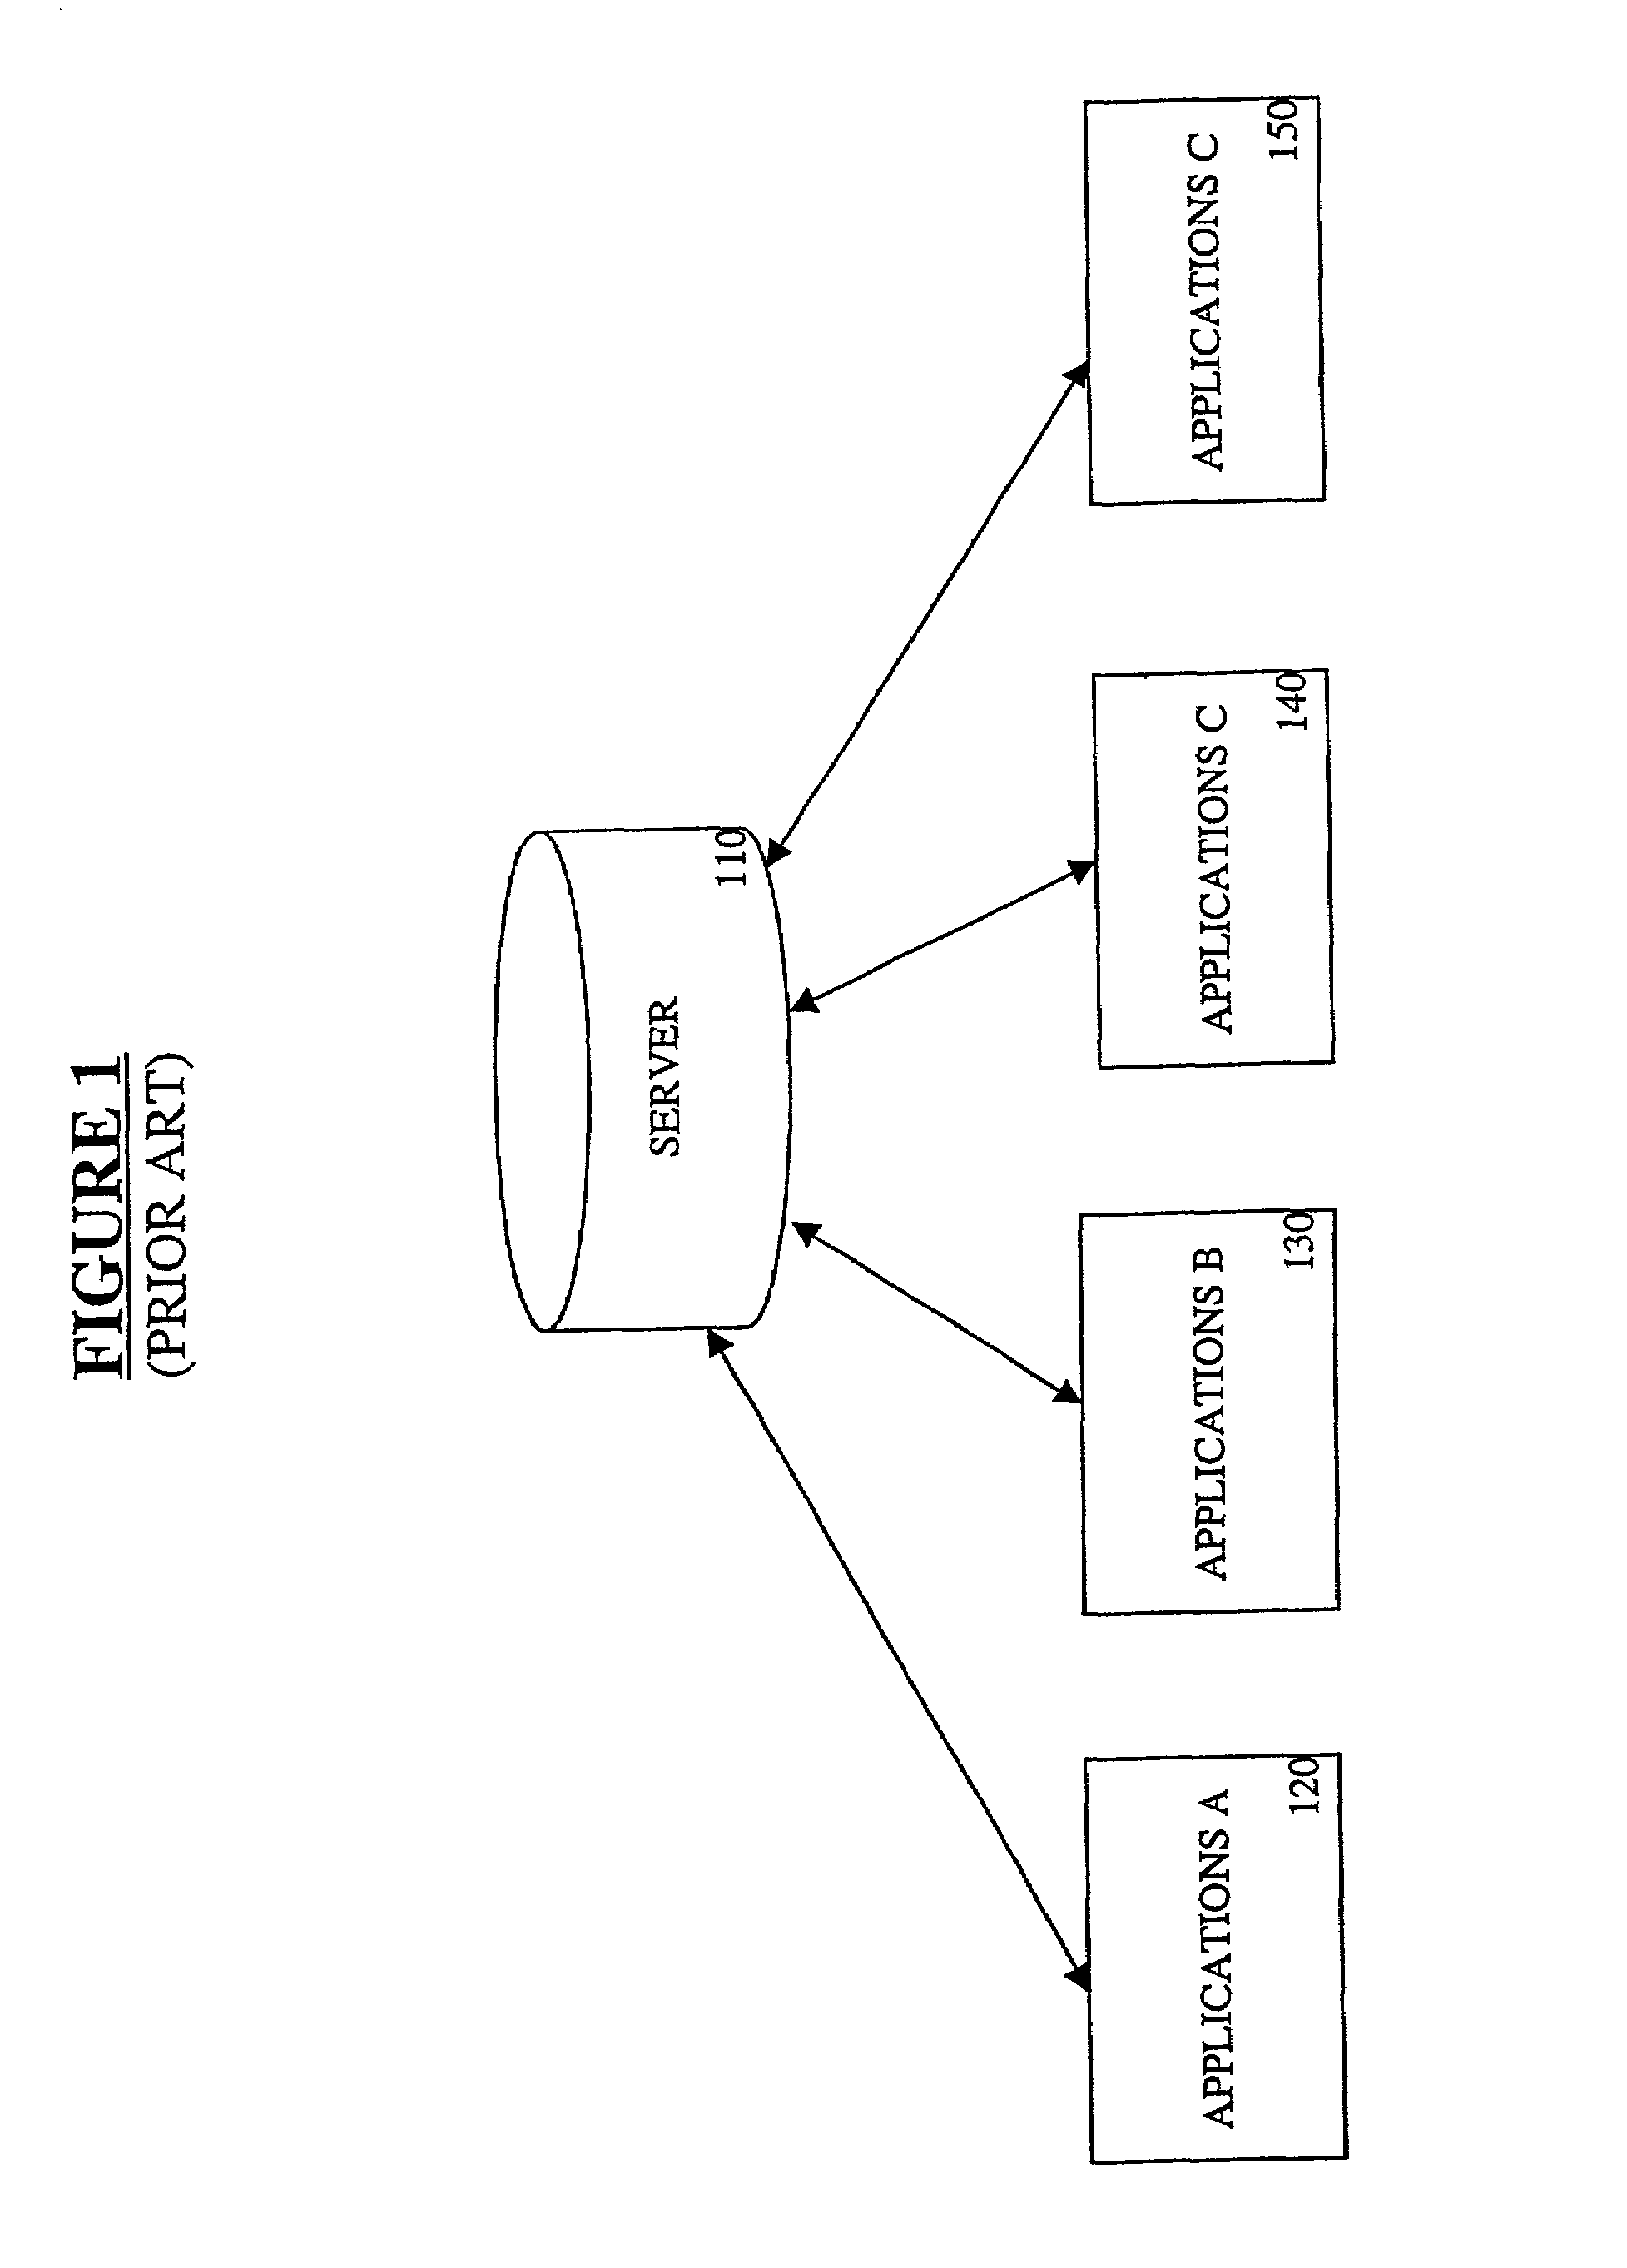 Uniform resource locator access management and control system and method